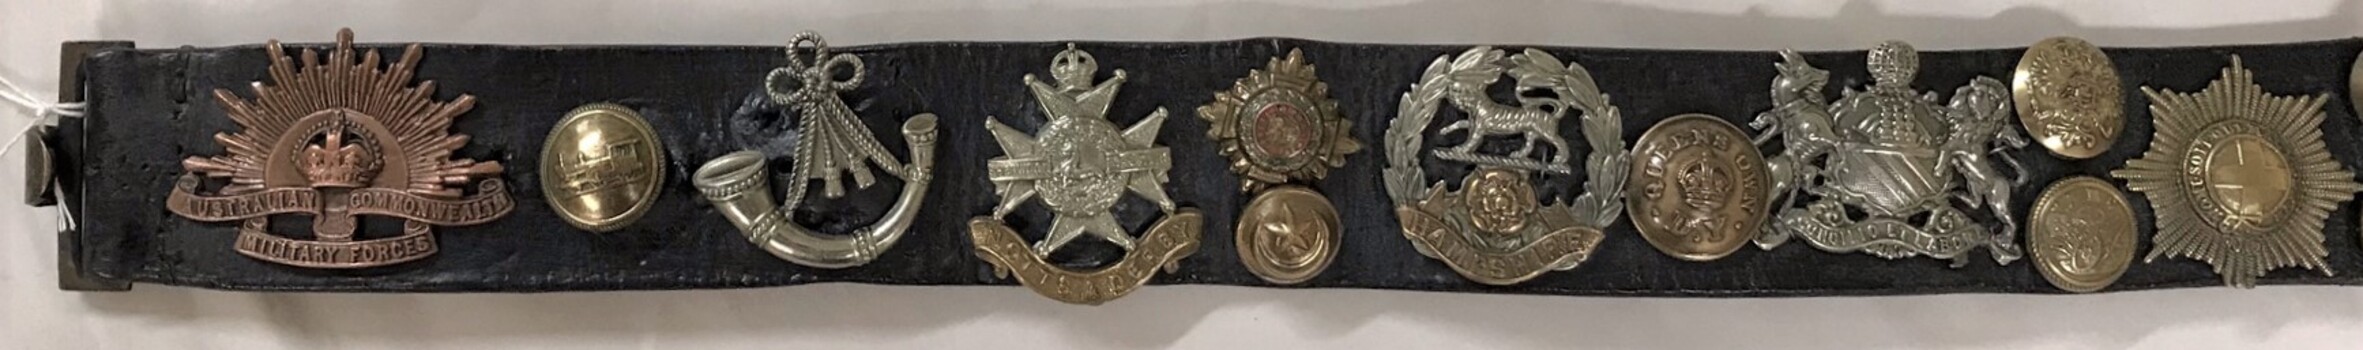 Portion of belt with badges on it.